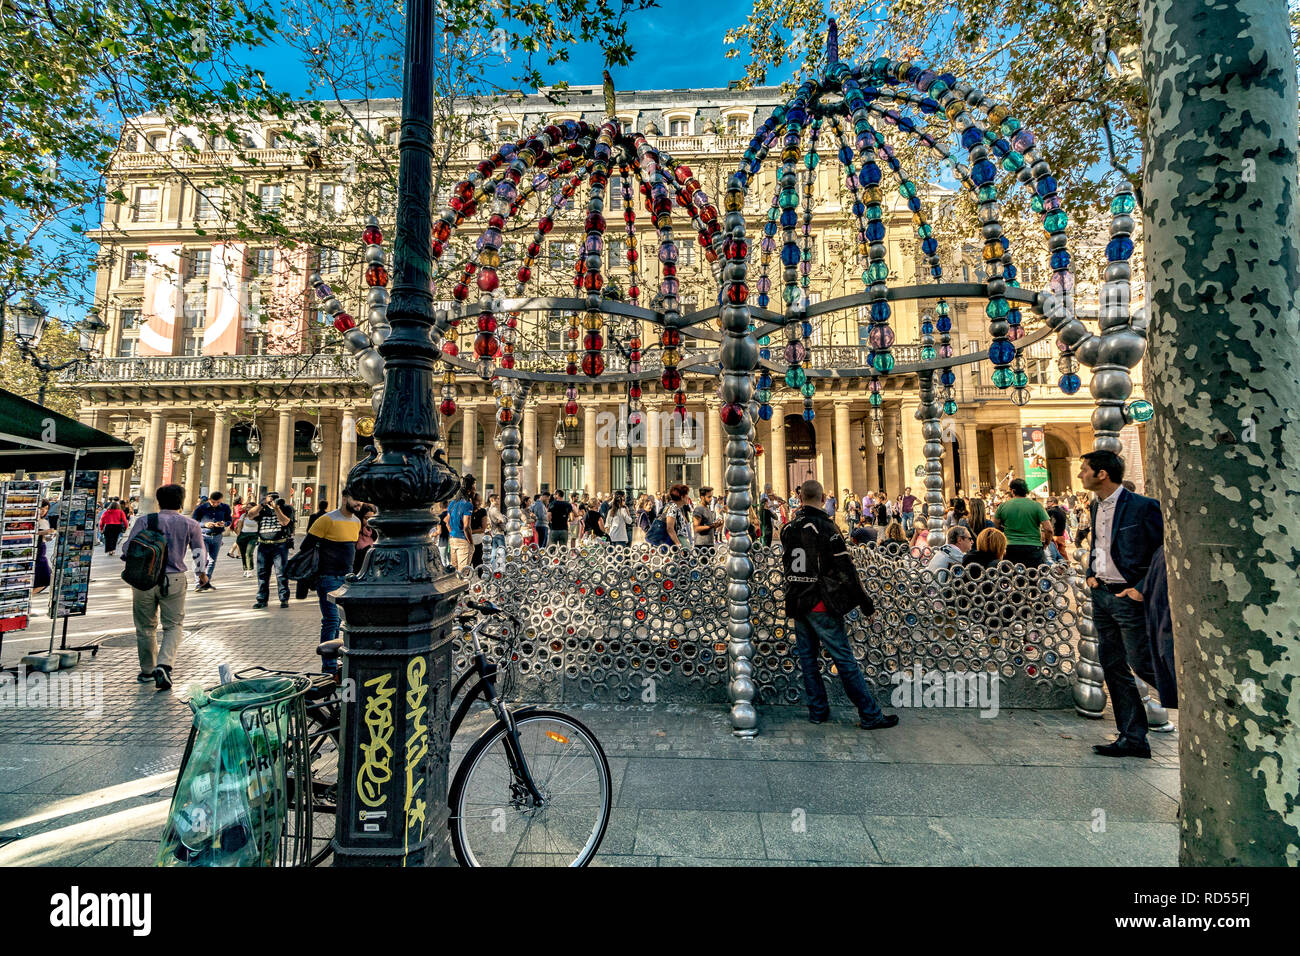 The colourful Cuploa or archway made made from Glass beads at The Entrance to Palais Royal – Musée du Louvre Metro station at  Place Colette ,Paris Stock Photo